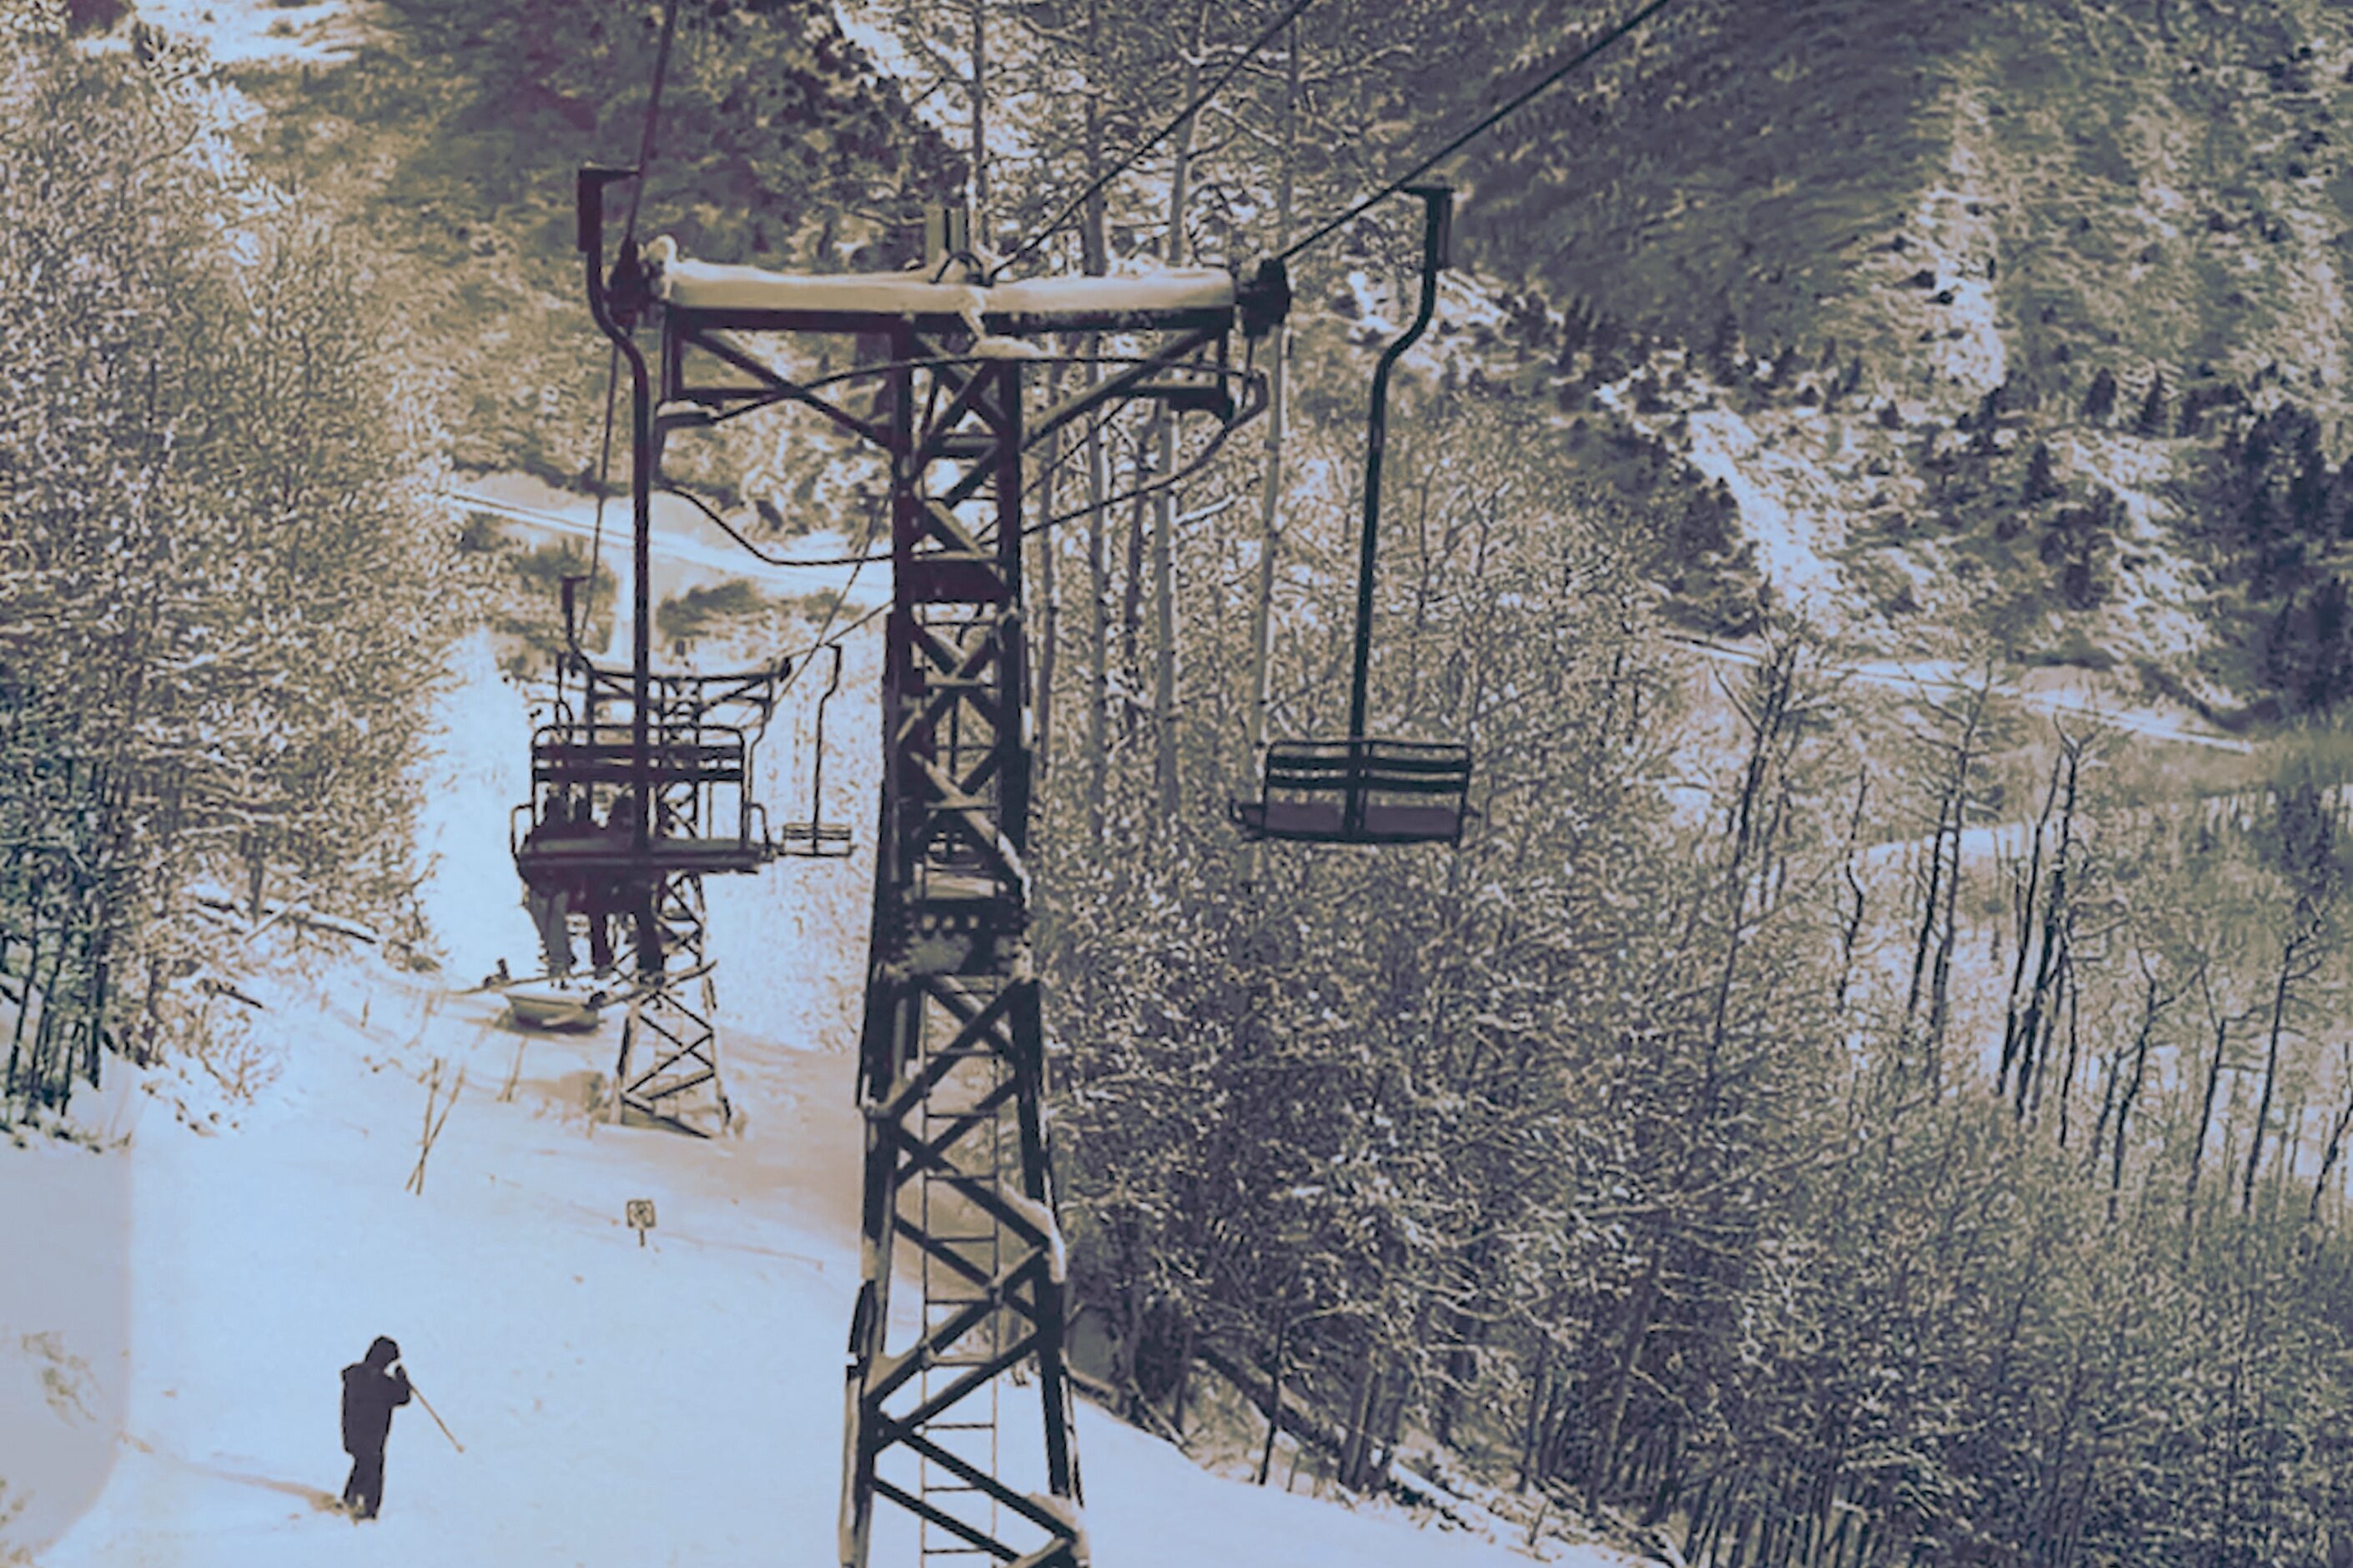 Sunlight Mountain Resort in Glenwood Springs plans to retire two historic lifts after this upcoming winter season. Segundo is the oldest operating lift in the state and was first installed at Aspen Mountain in 1954 before coming to Sunlight in 1973.